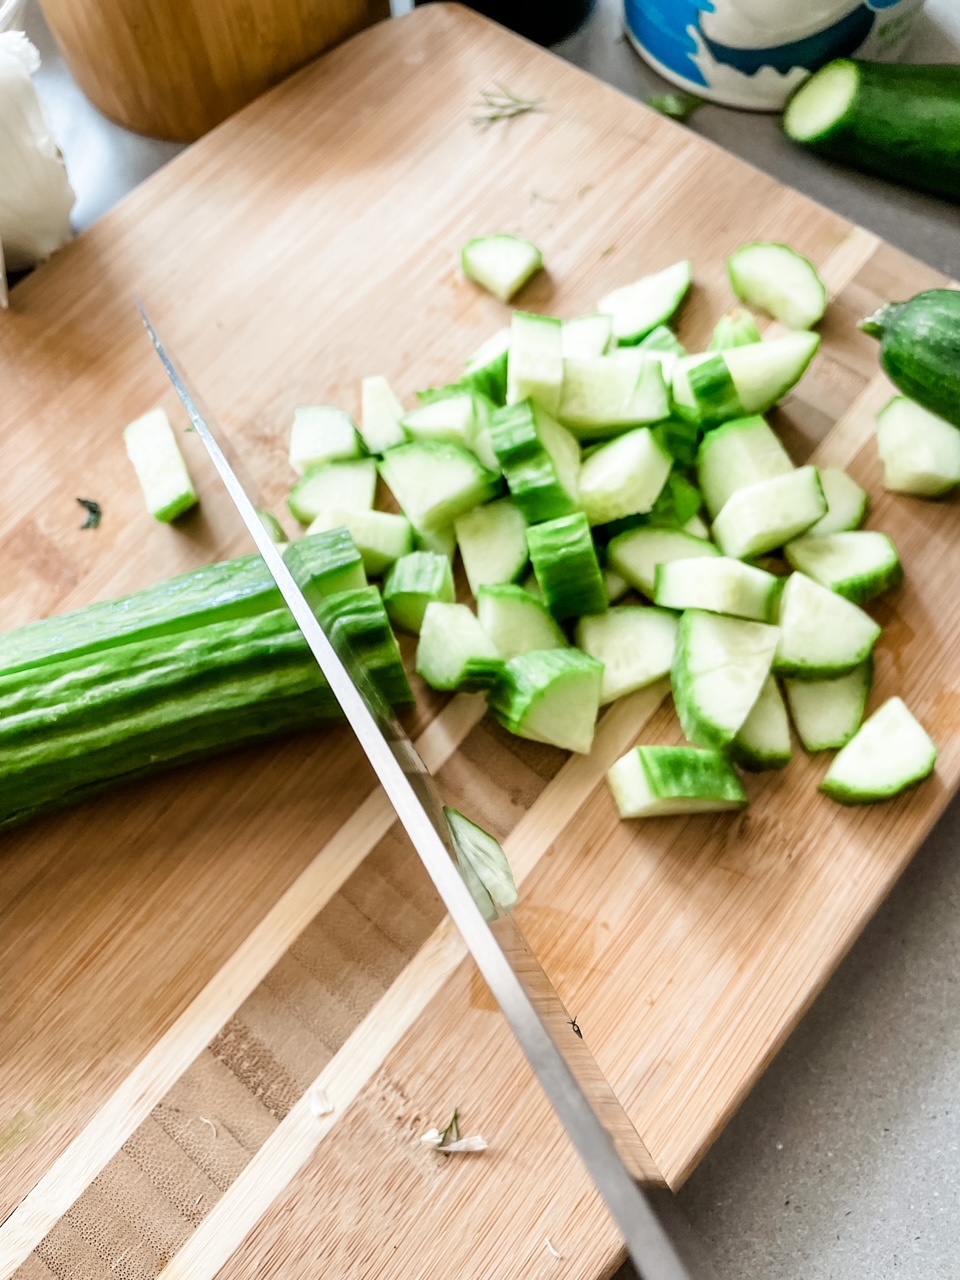 One of the english cucumbers being sliced up up on a wooden board